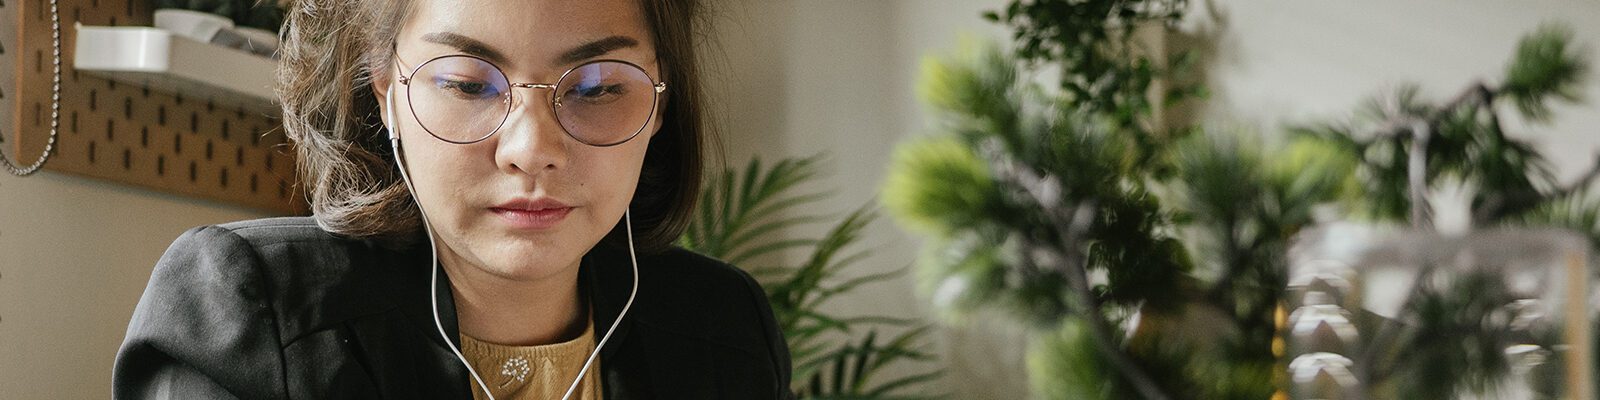 Woman wearing glasses and headphones working in an office